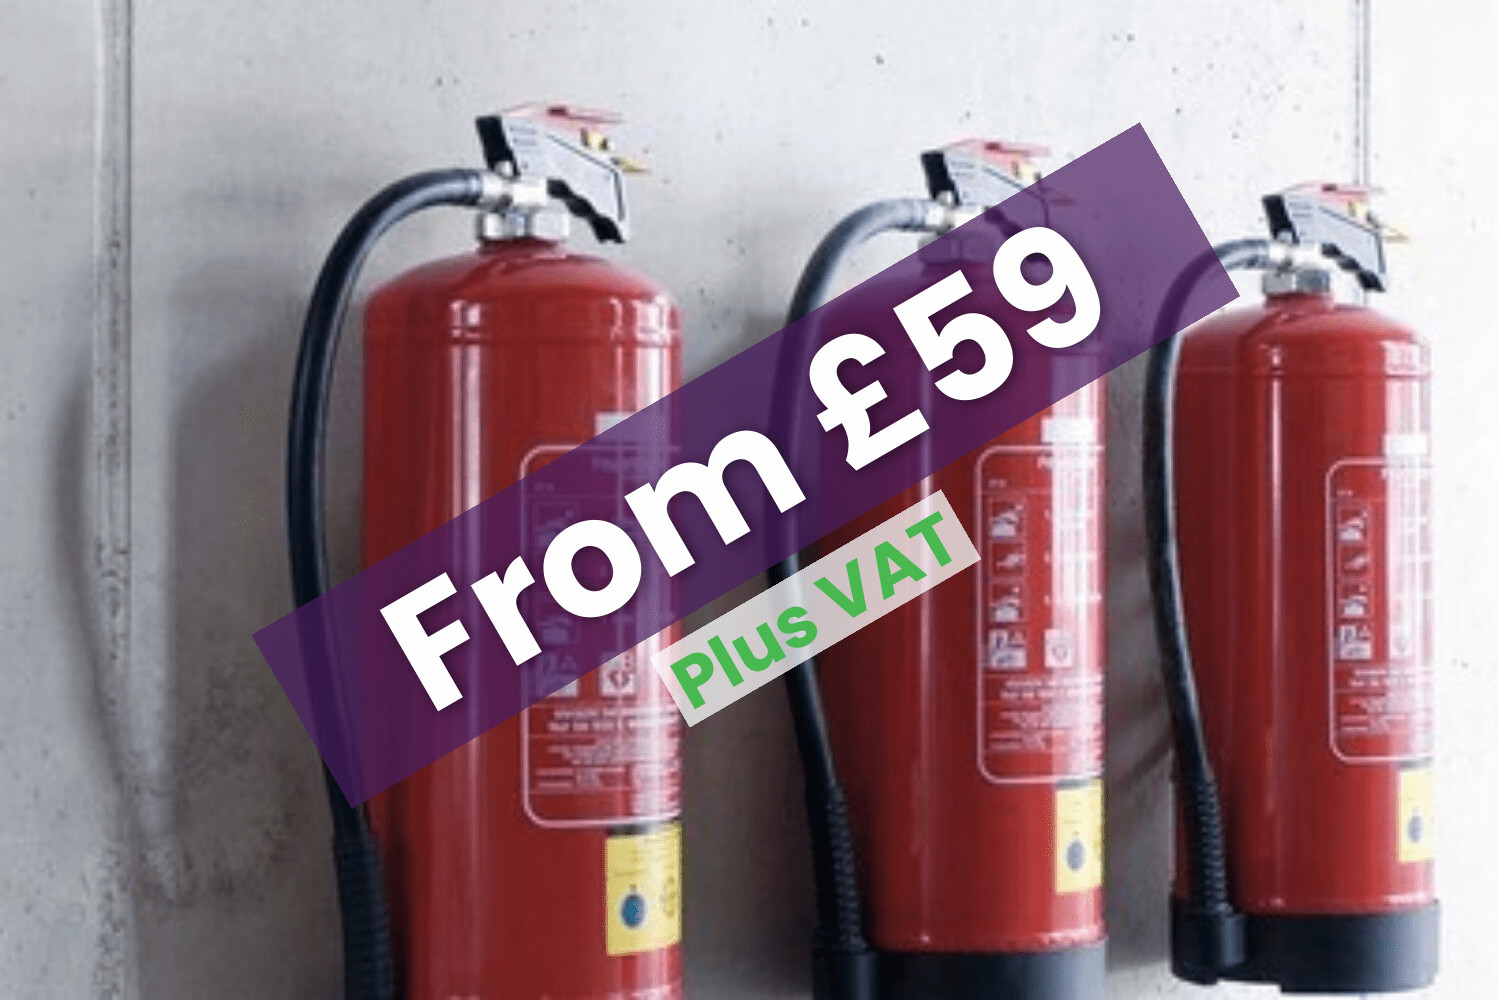 Fire Extinguisher Servicing For All Business Sectors